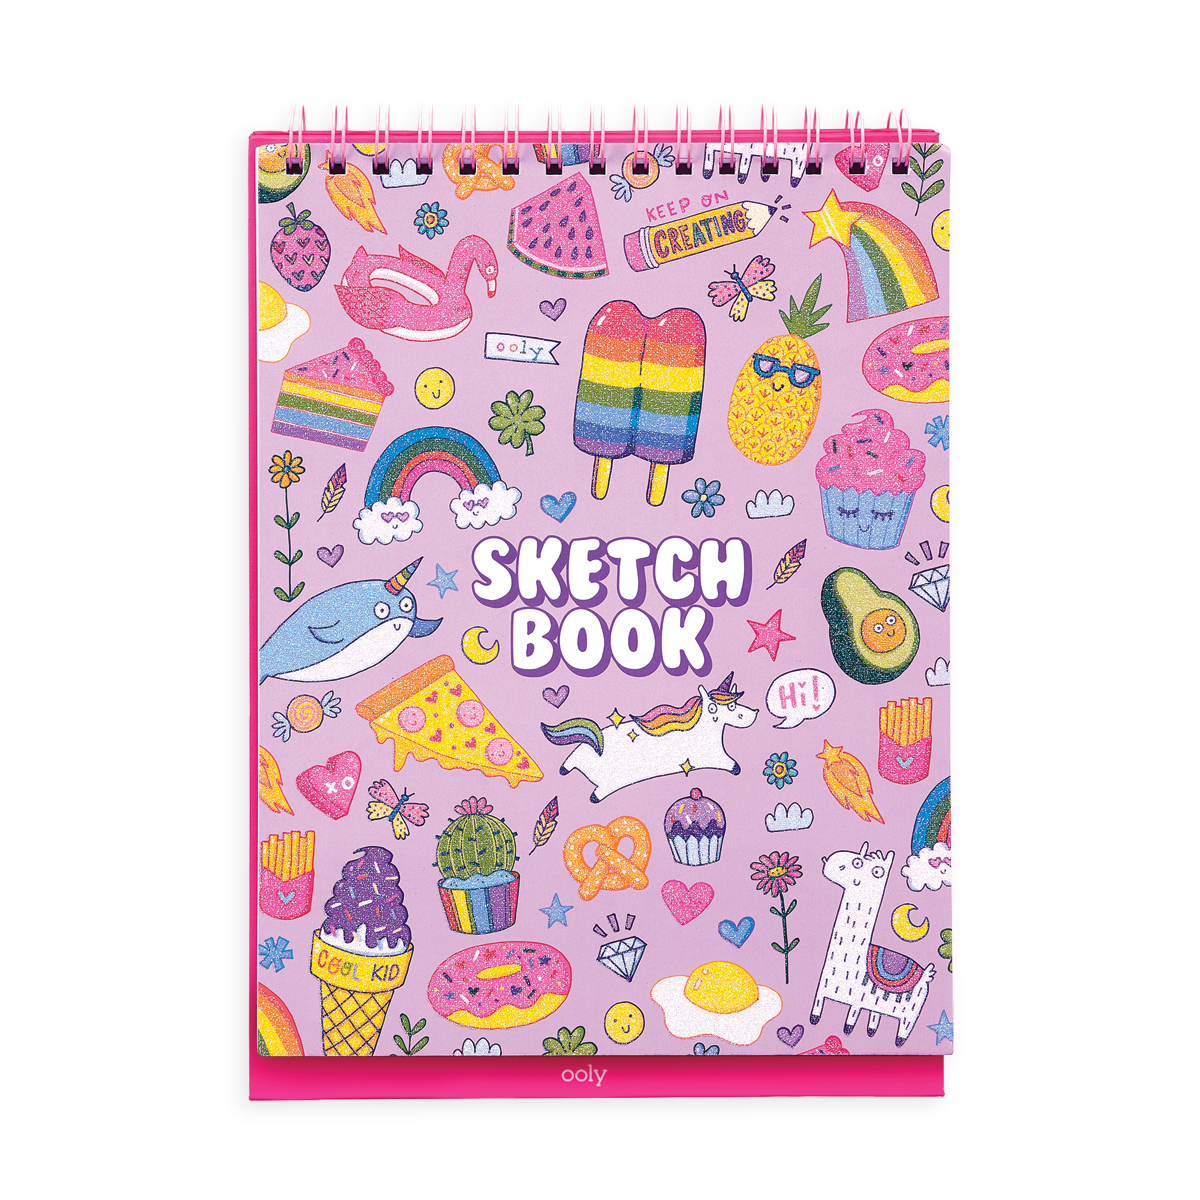 Sketchbook: Beautiful Paint Theme Cover Kids and Adults Drawing and Writing  Blank Page Sketch book Journal to Create, for Personal Artwork, Comics,  Doodles, and More: Jones, Eric: 9781085827768: : Books